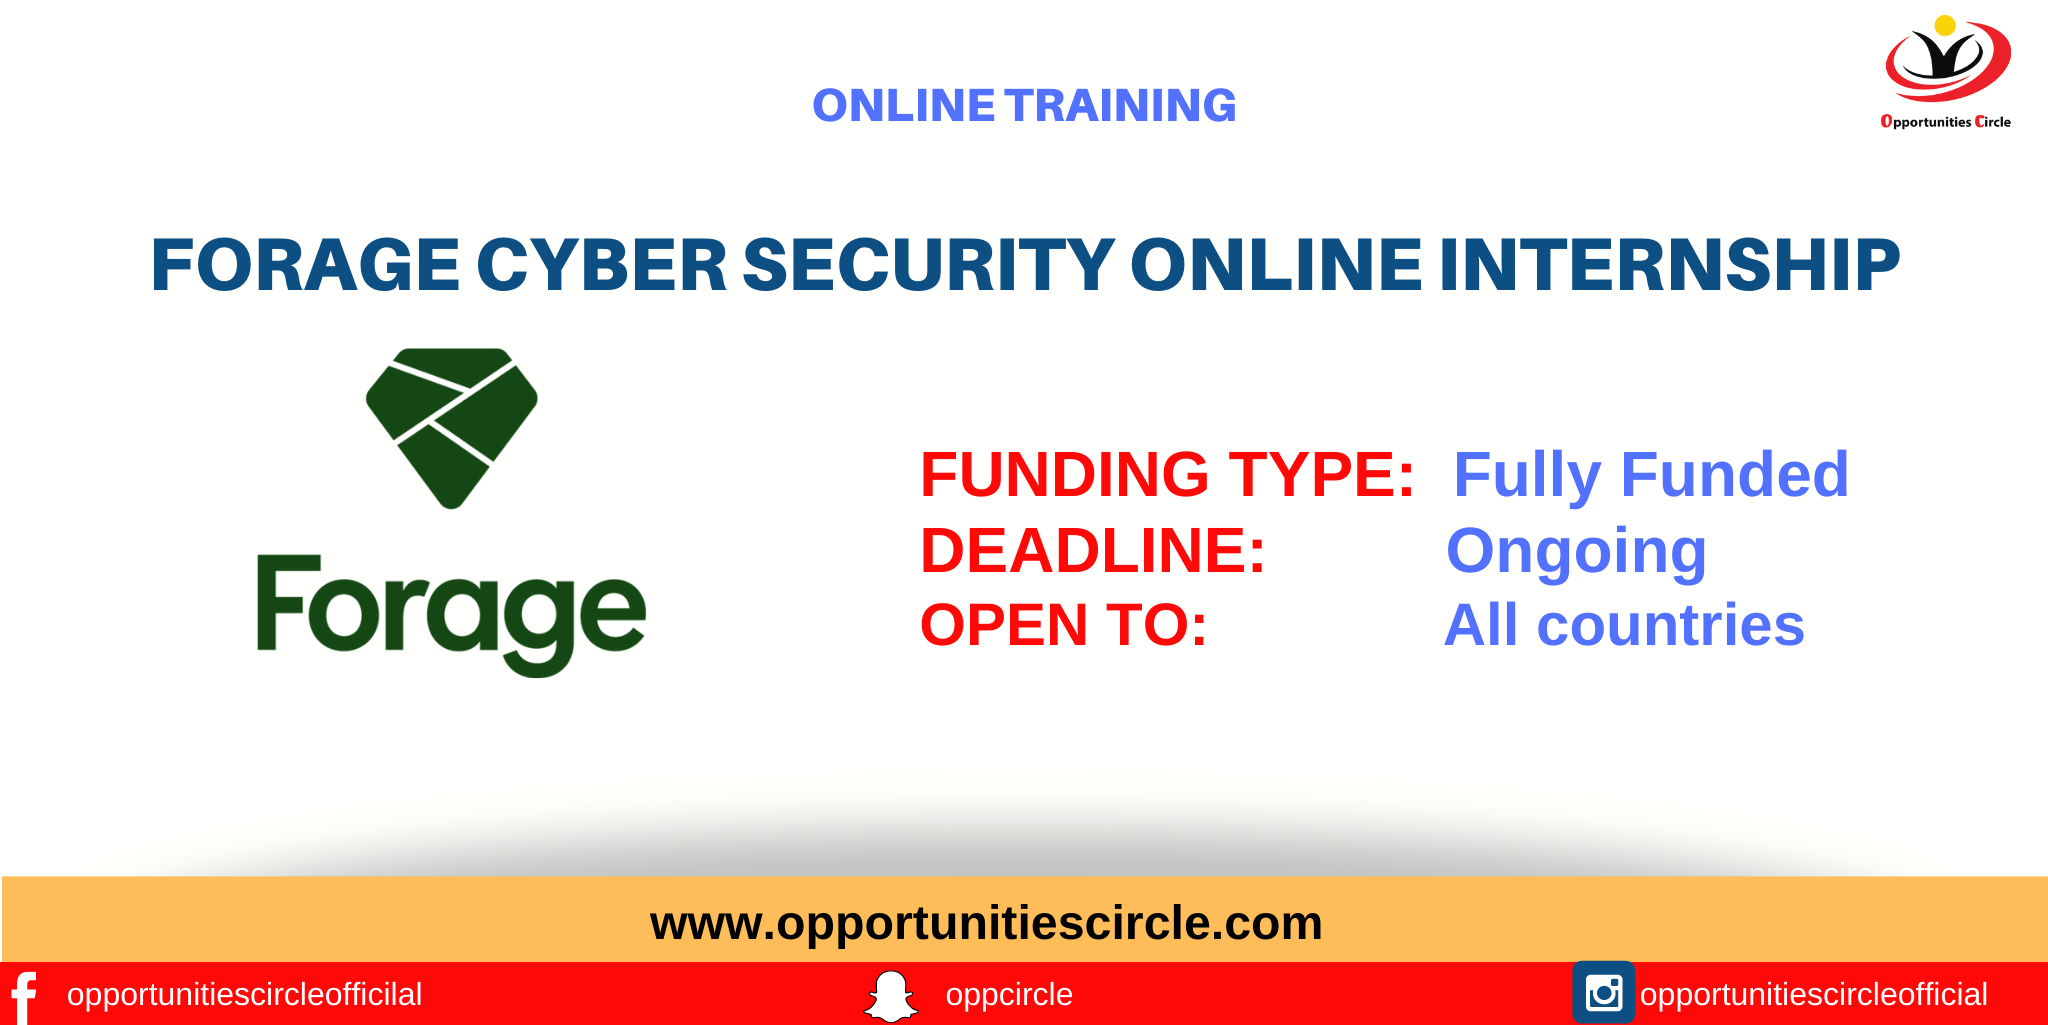 Forage Cyber Security Online Internship 2021 Opportunities Circle